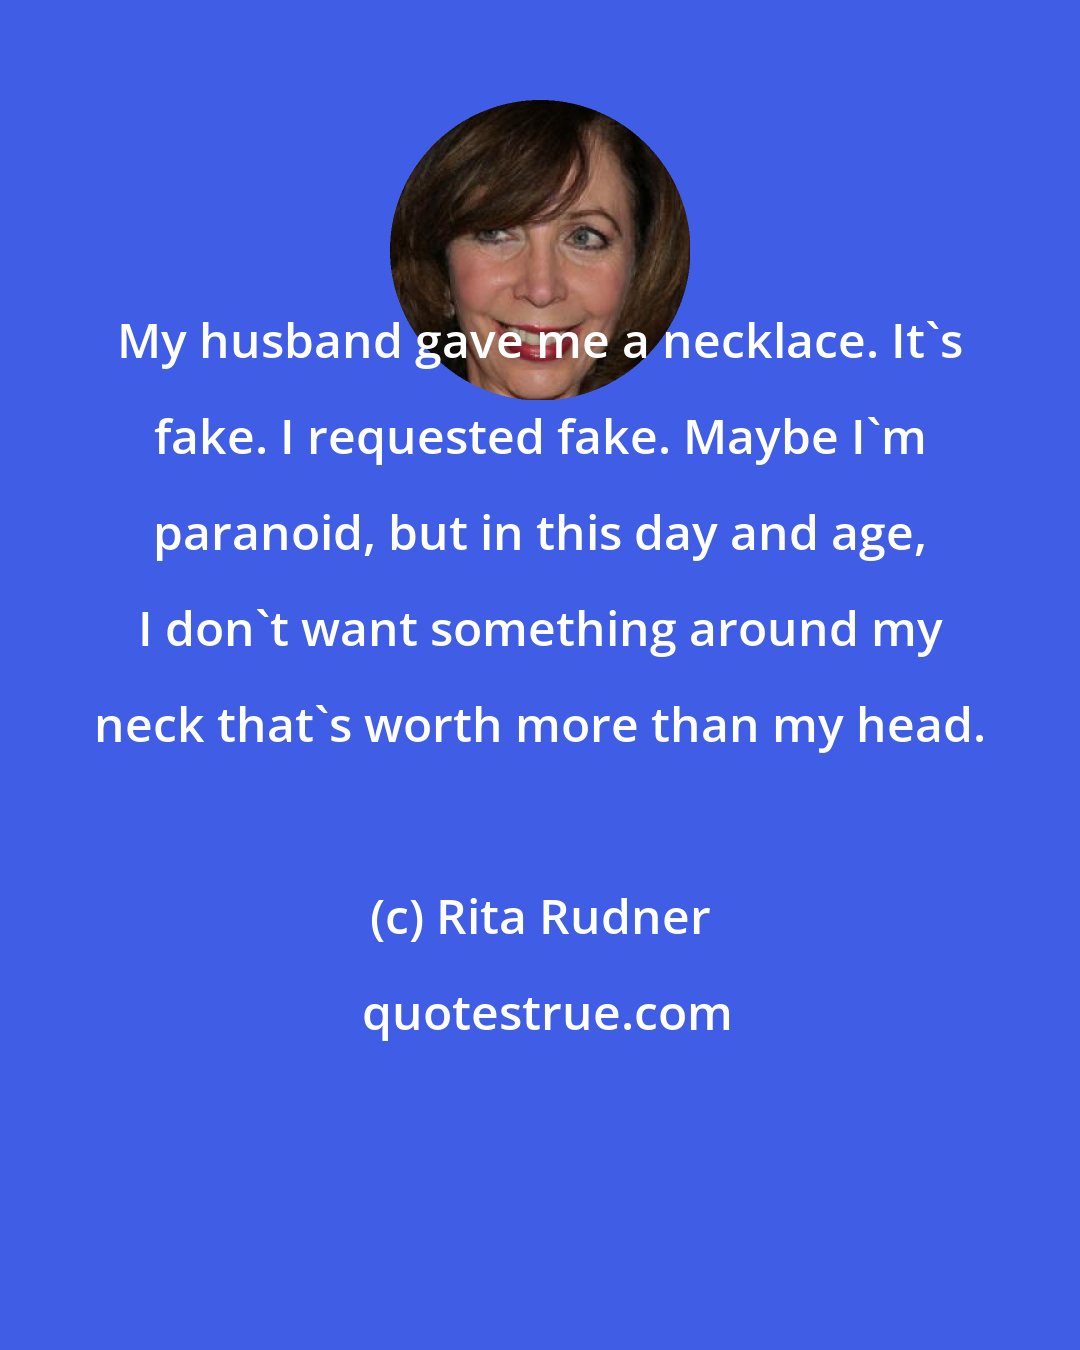 Rita Rudner: My husband gave me a necklace. It's fake. I requested fake. Maybe I'm paranoid, but in this day and age, I don't want something around my neck that's worth more than my head.